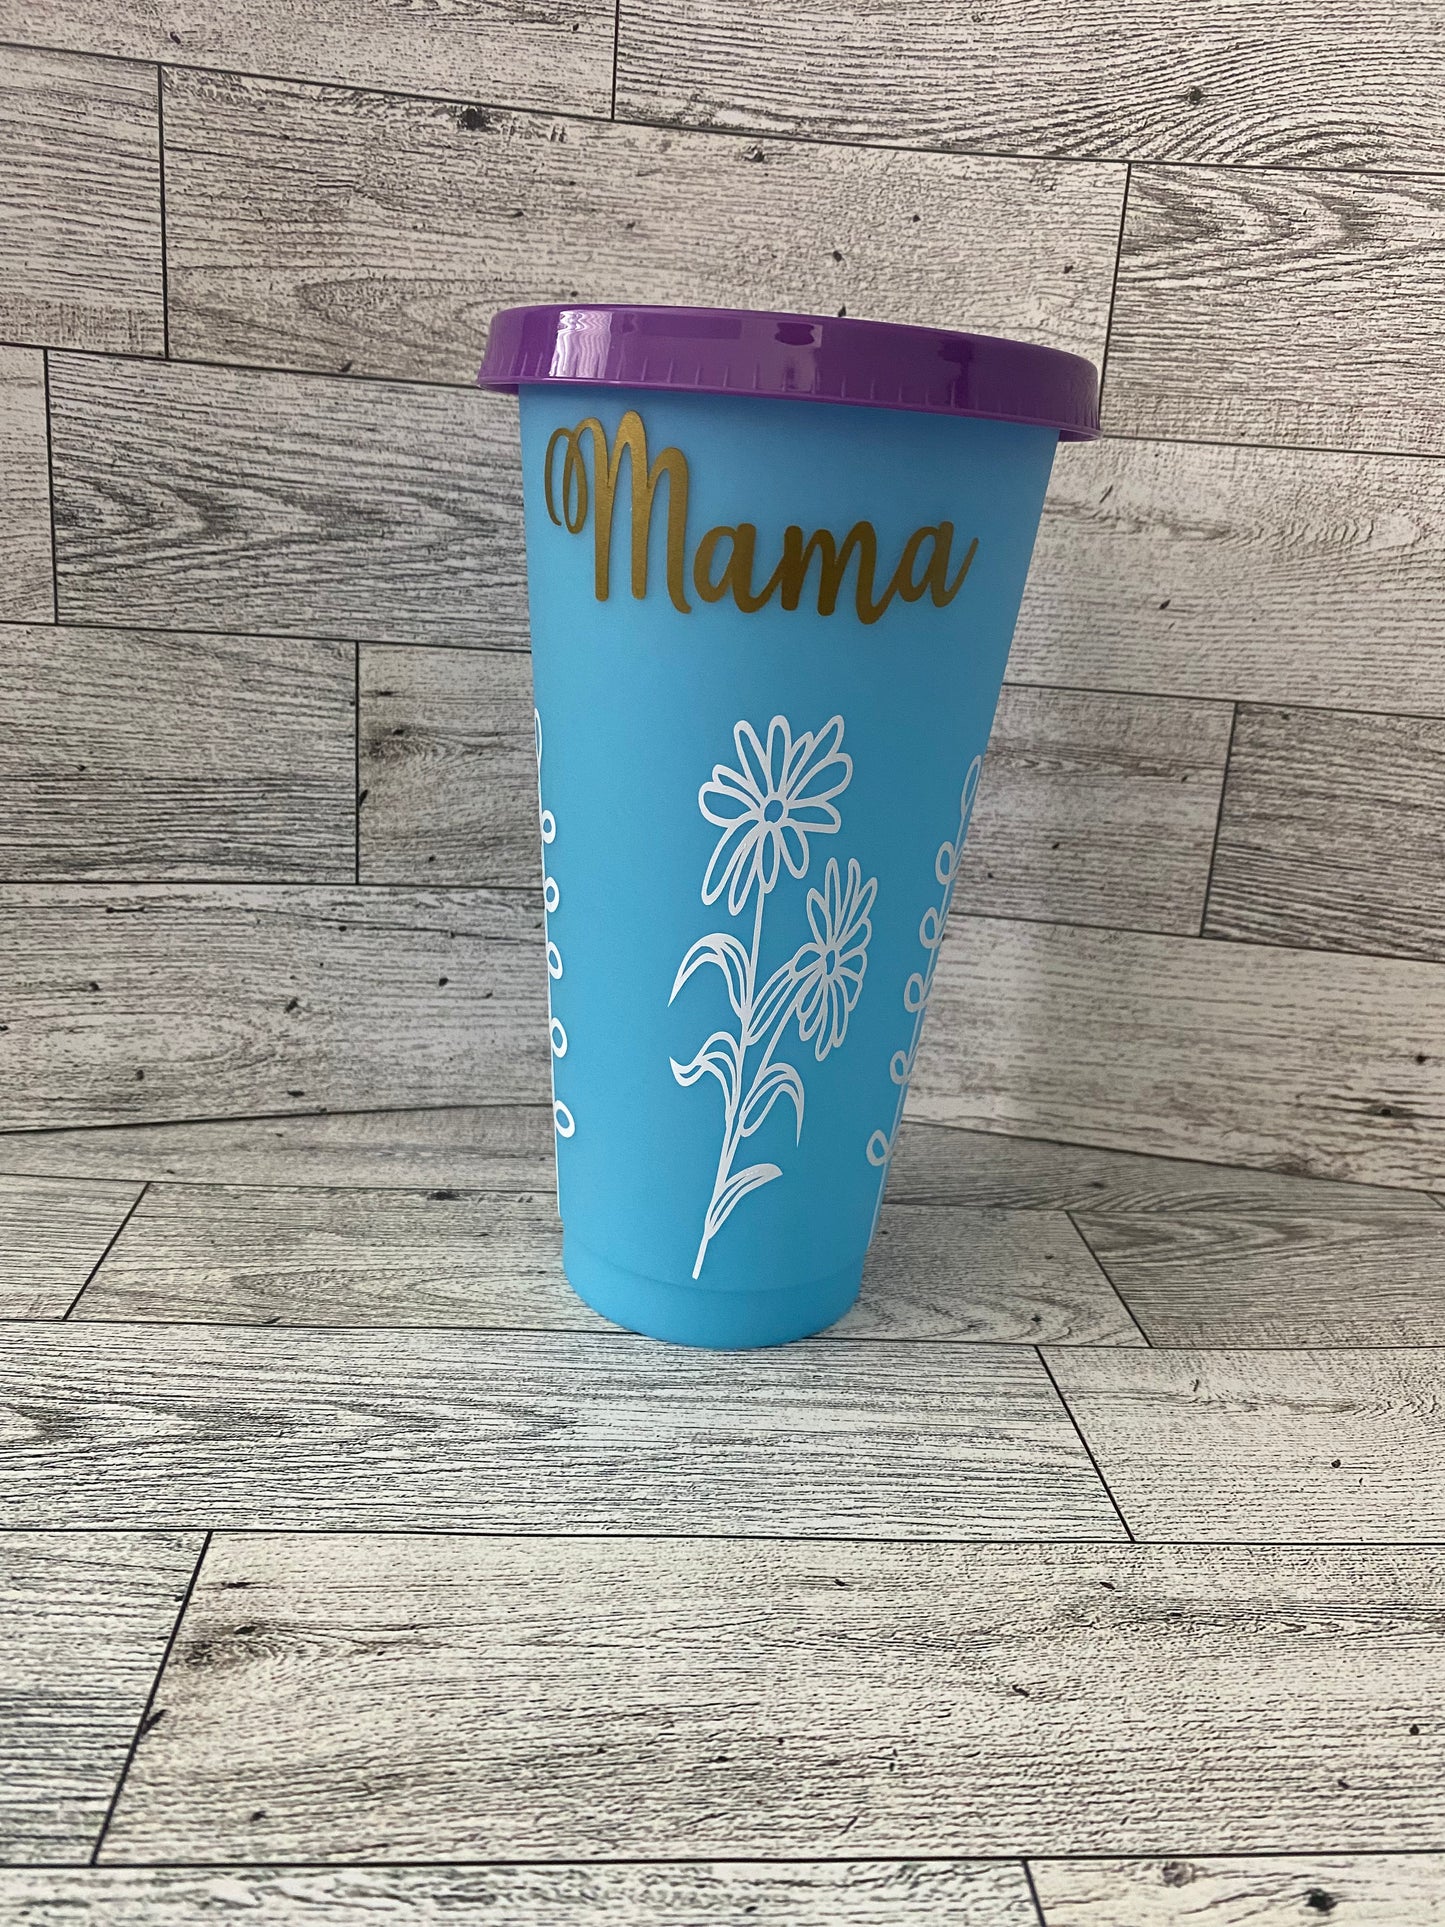 24oz Color Changing Cups